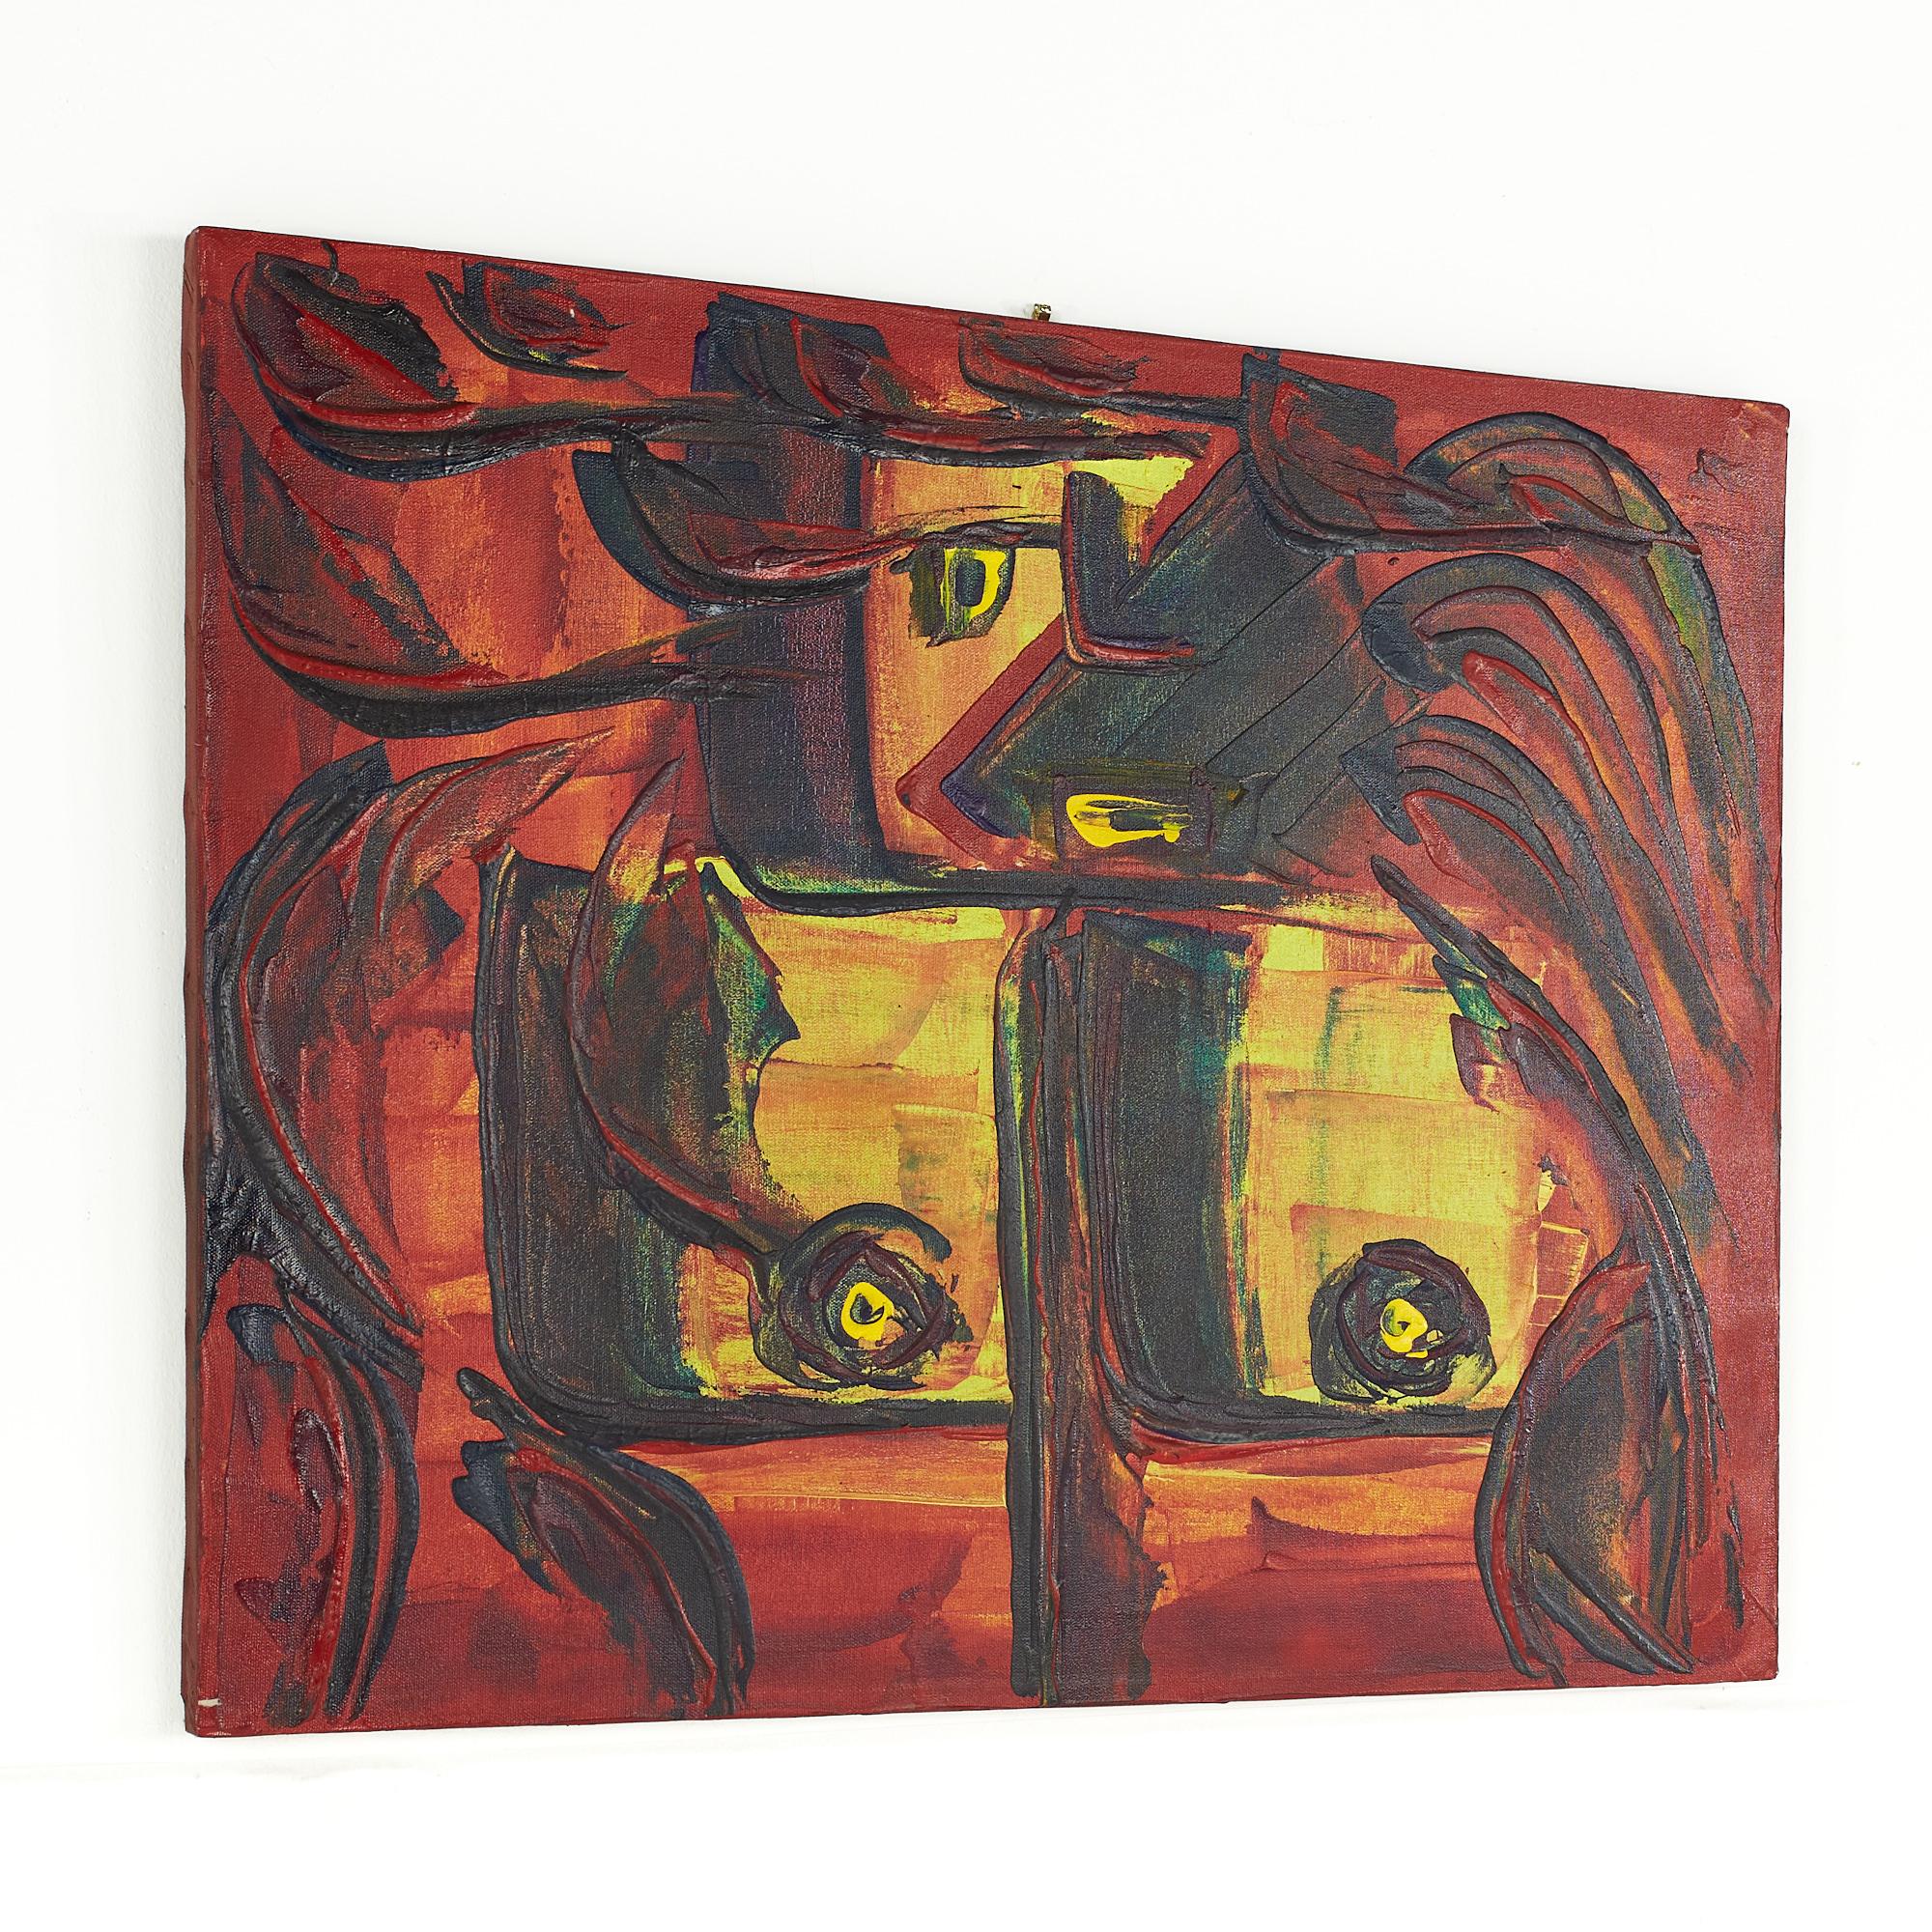 Bruce Myers mid-century abstract original oil on canvas painting no. 5

This painting measures: 22 wide x .75 deep x 28 inches high.

This painting is in good vintage condition.

We take our photos in a controlled lighting studio to show as